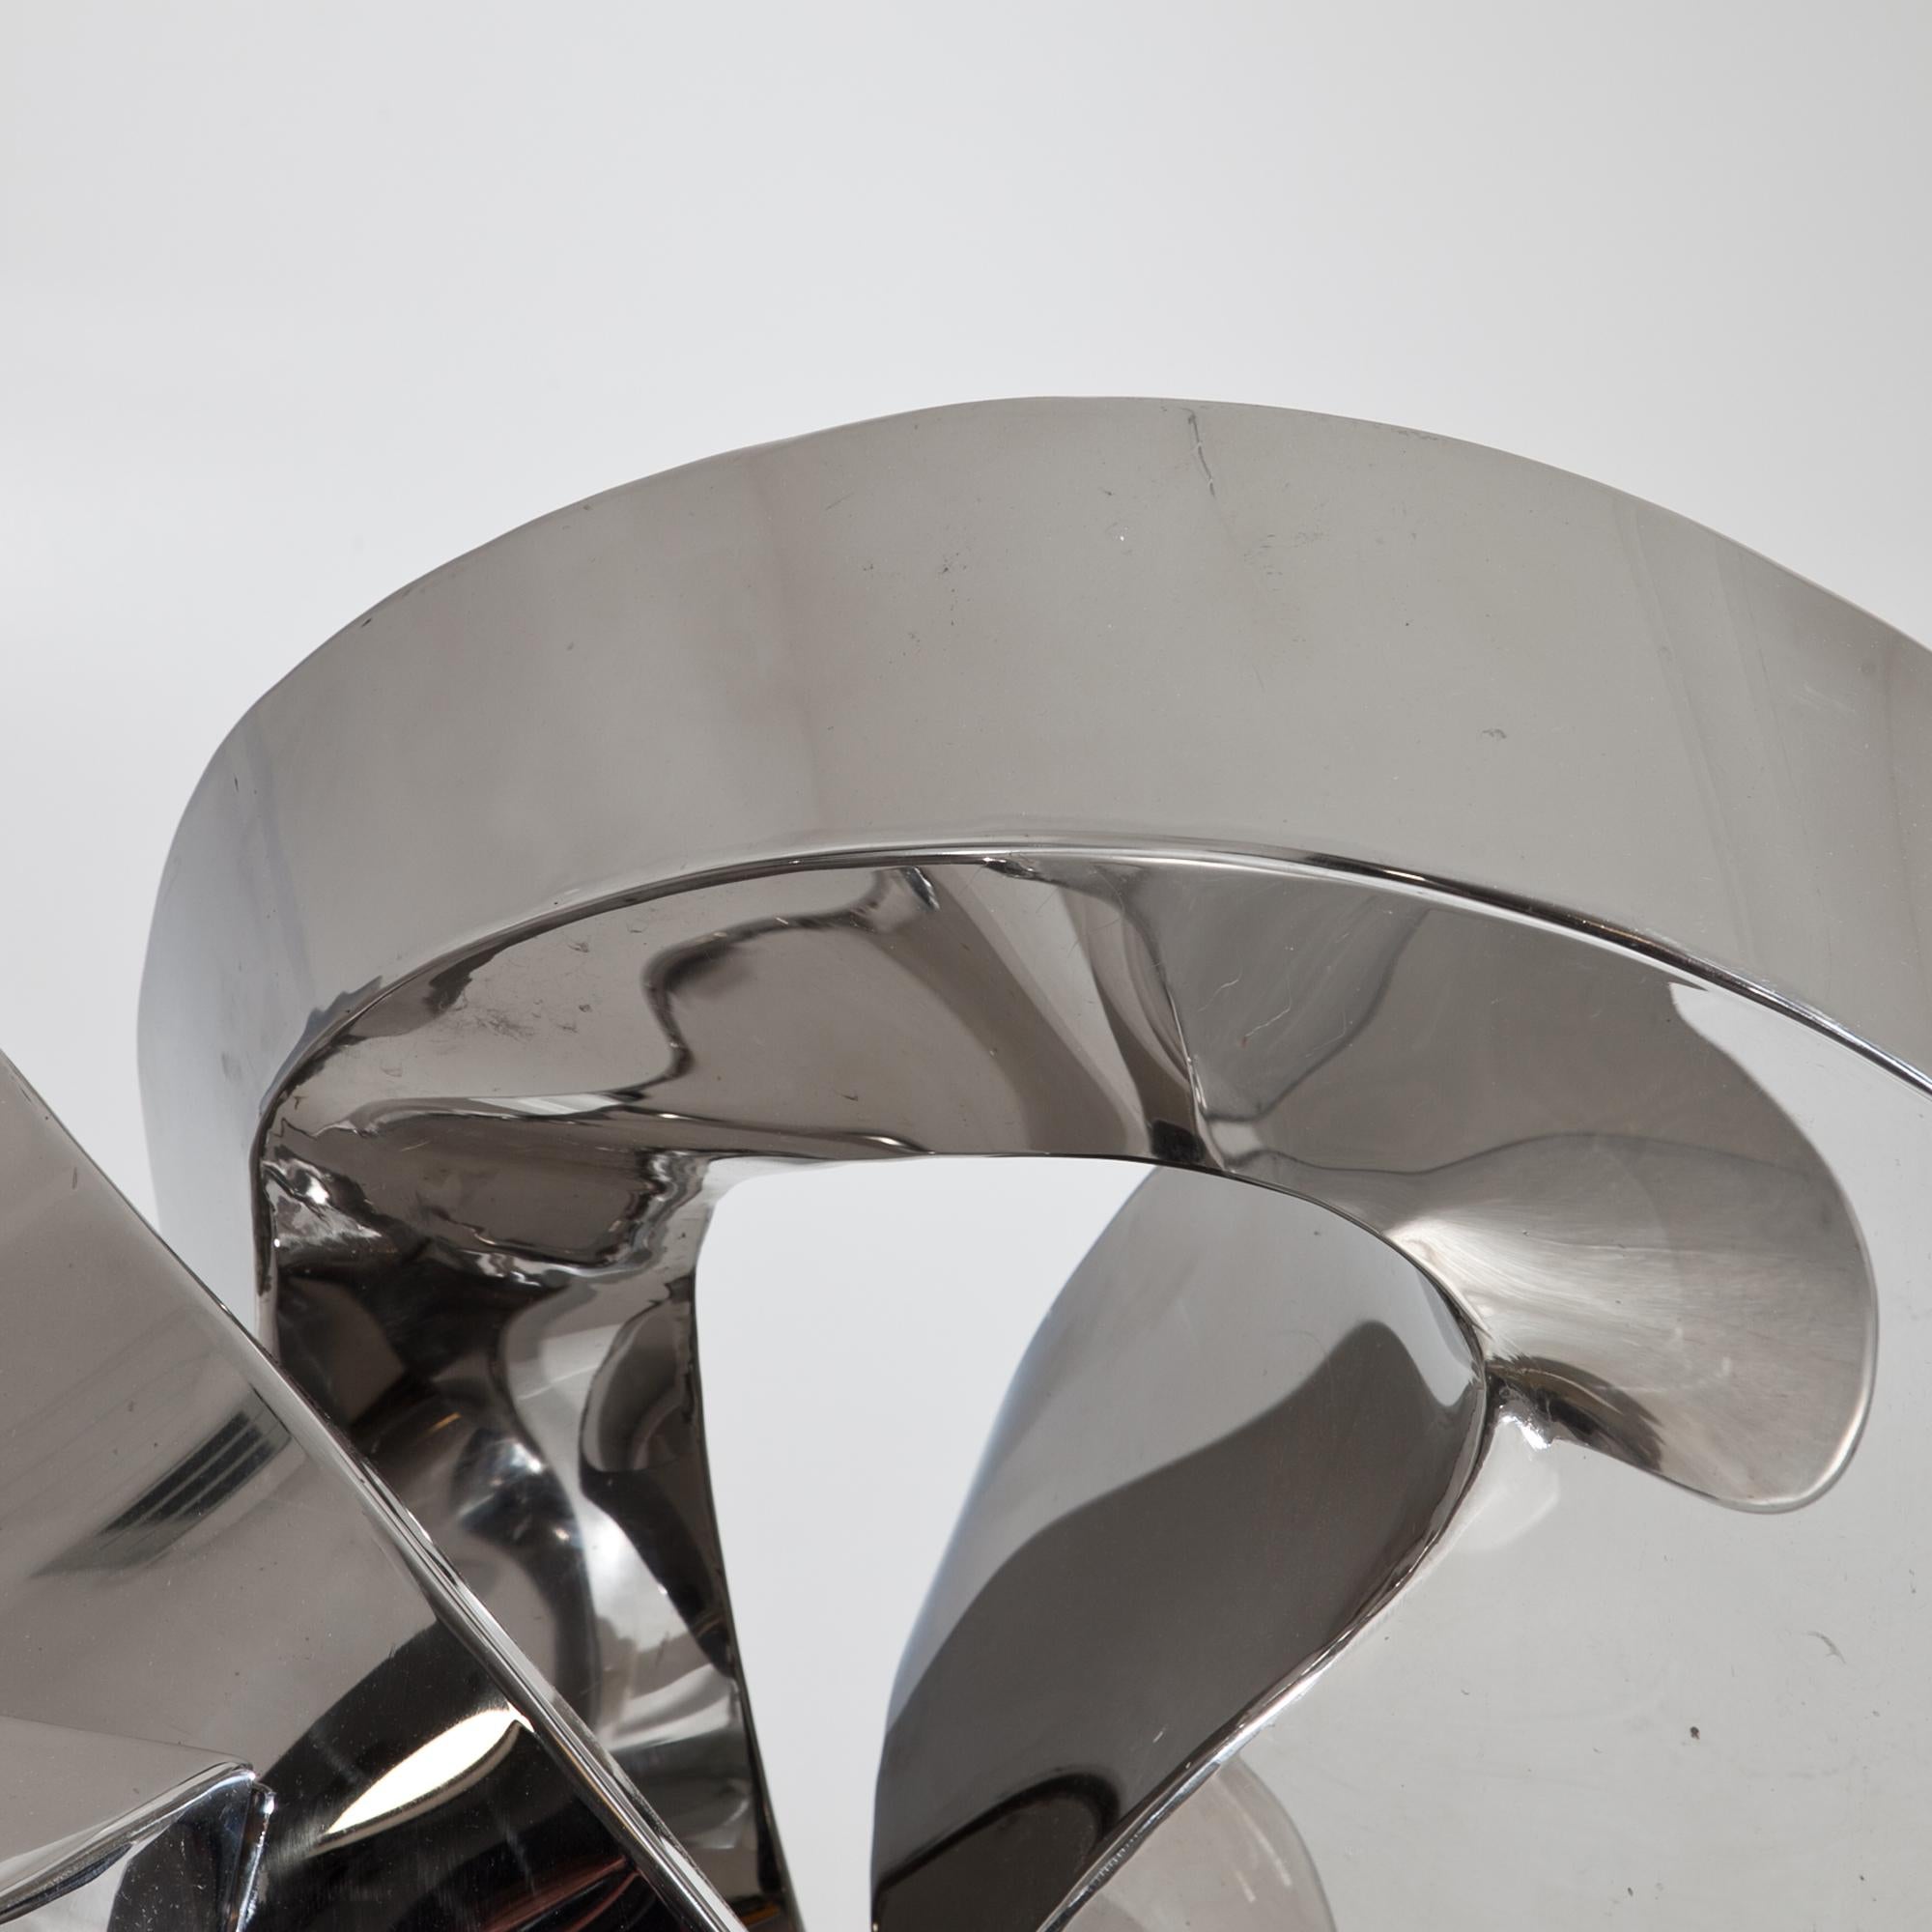 REFLEKTOR, Jörg Bach, 2013, polished Stainless Steel, Abstract Sculpture, Germany For Sale 3